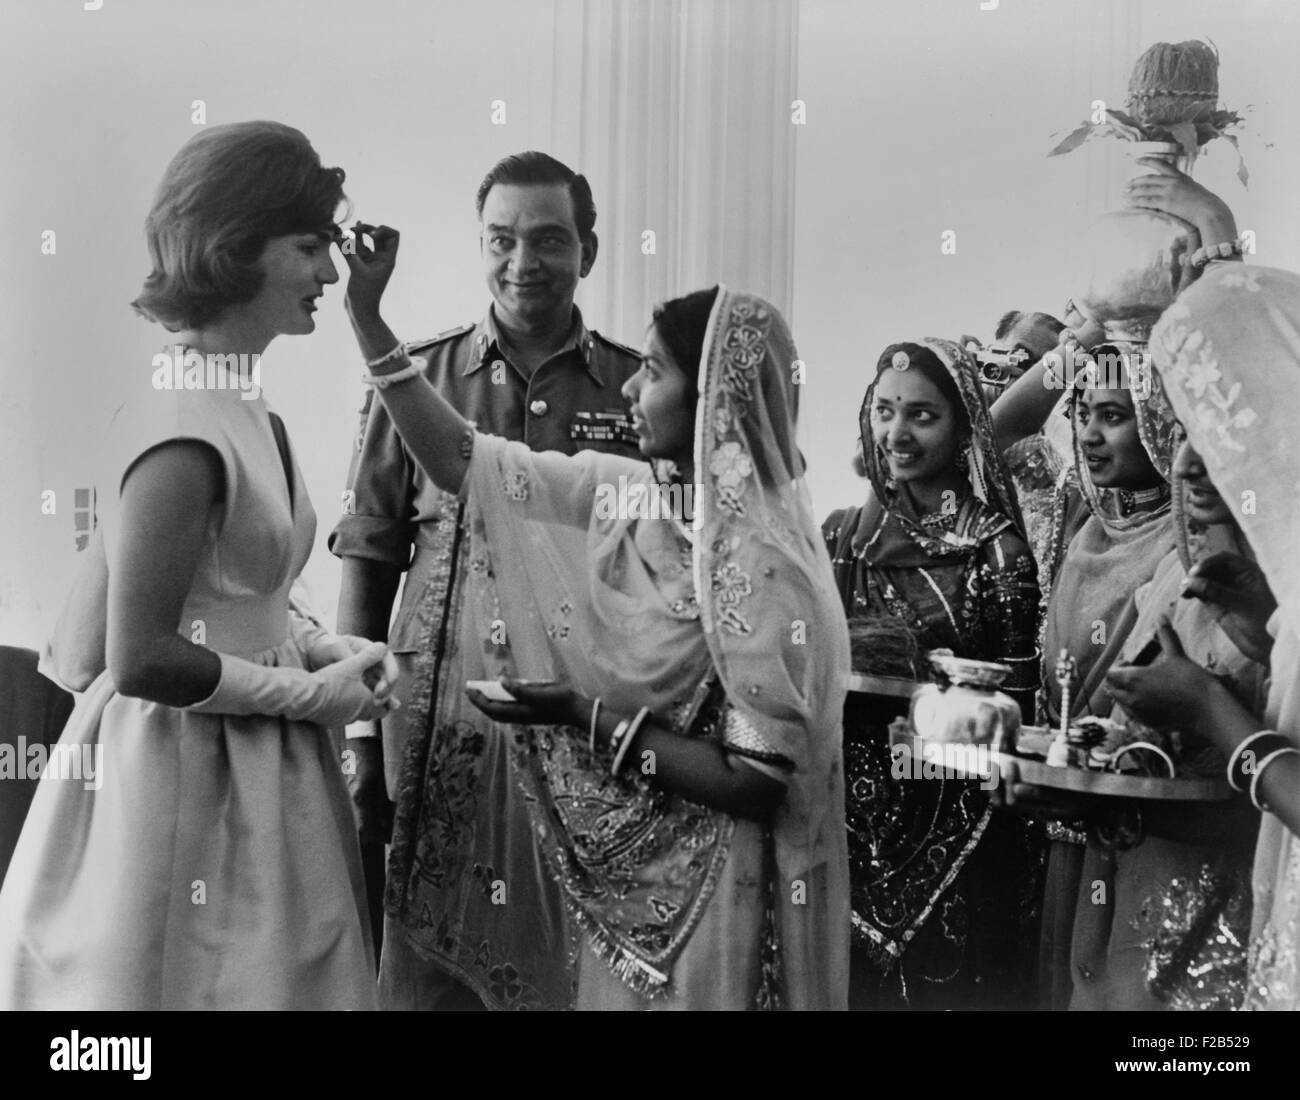 Jacqueline Kennedy having a 'bindi' placed on her forehead at Jaipur, India. A bindi is a red dot on the forehead which is a sign of marriage. - (BSLOC 2015 1 133) Stock Photo